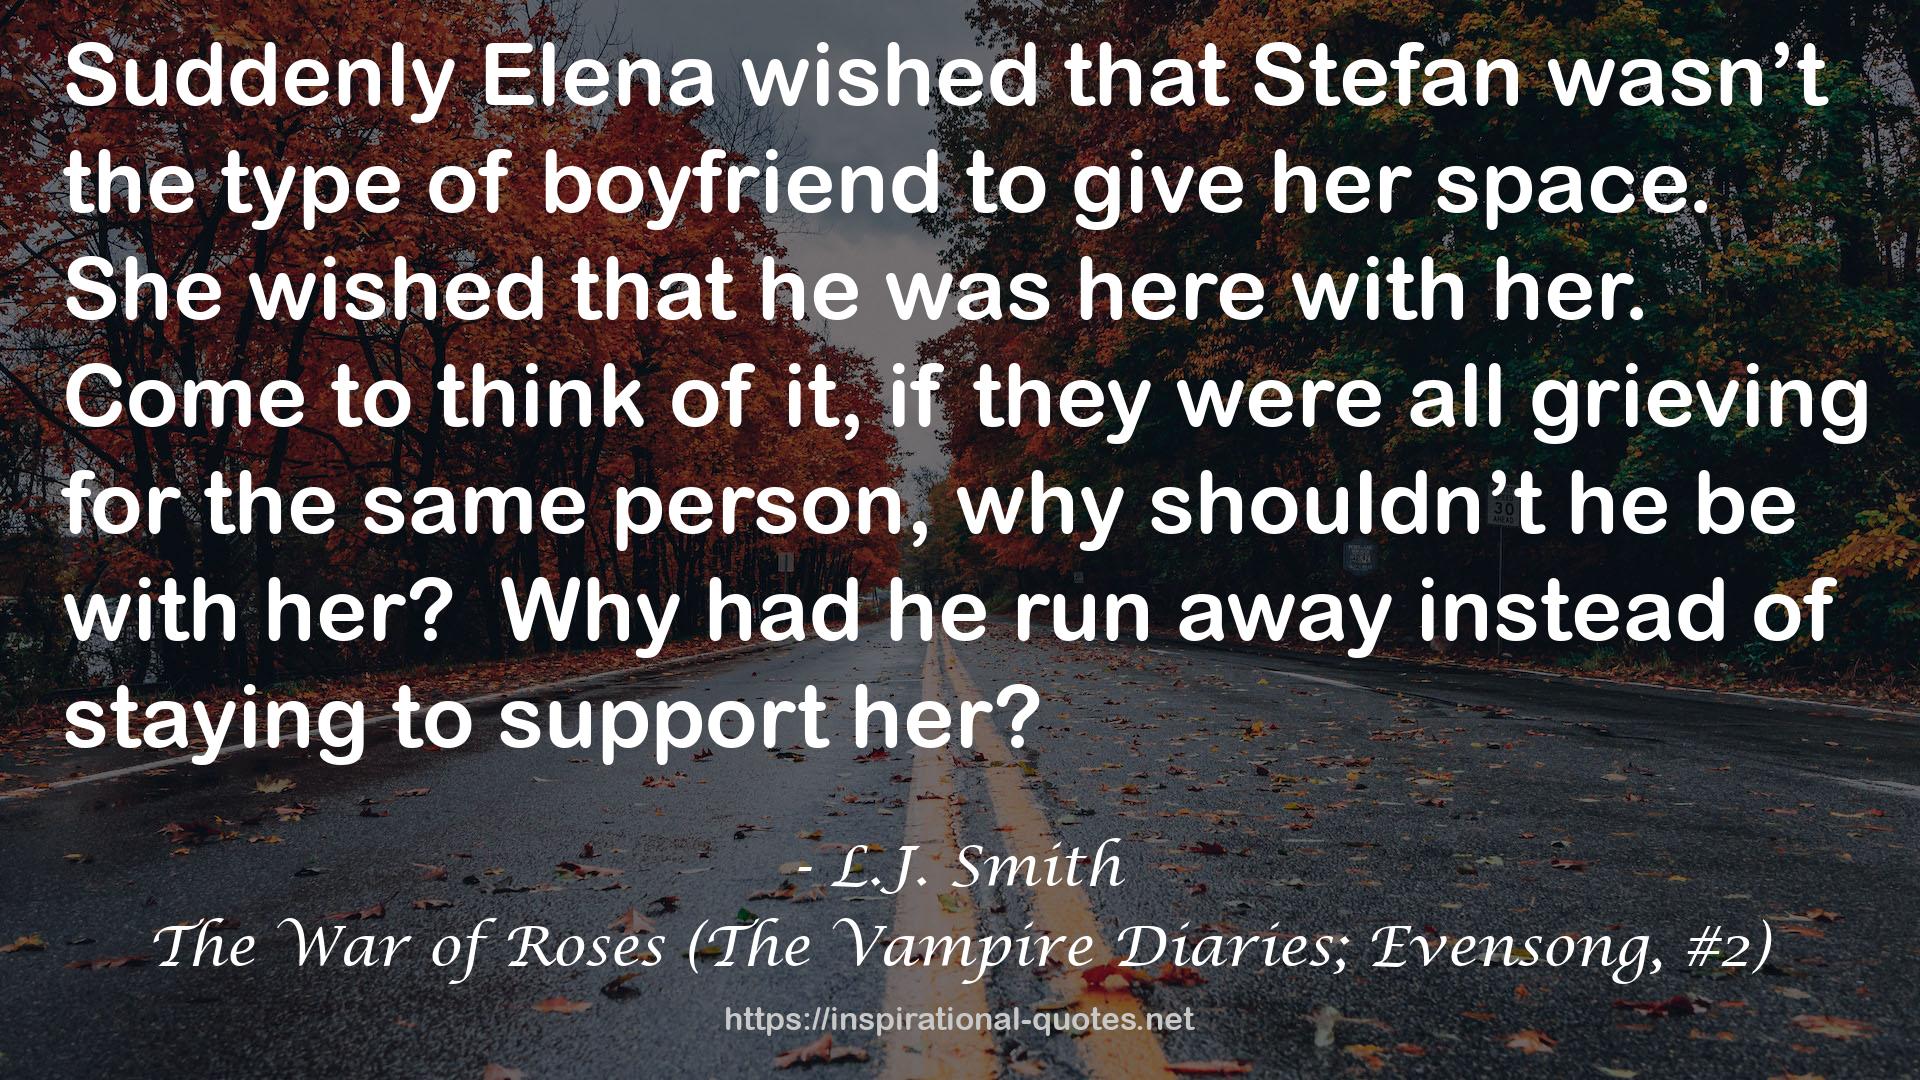 The War of Roses (The Vampire Diaries; Evensong, #2) QUOTES